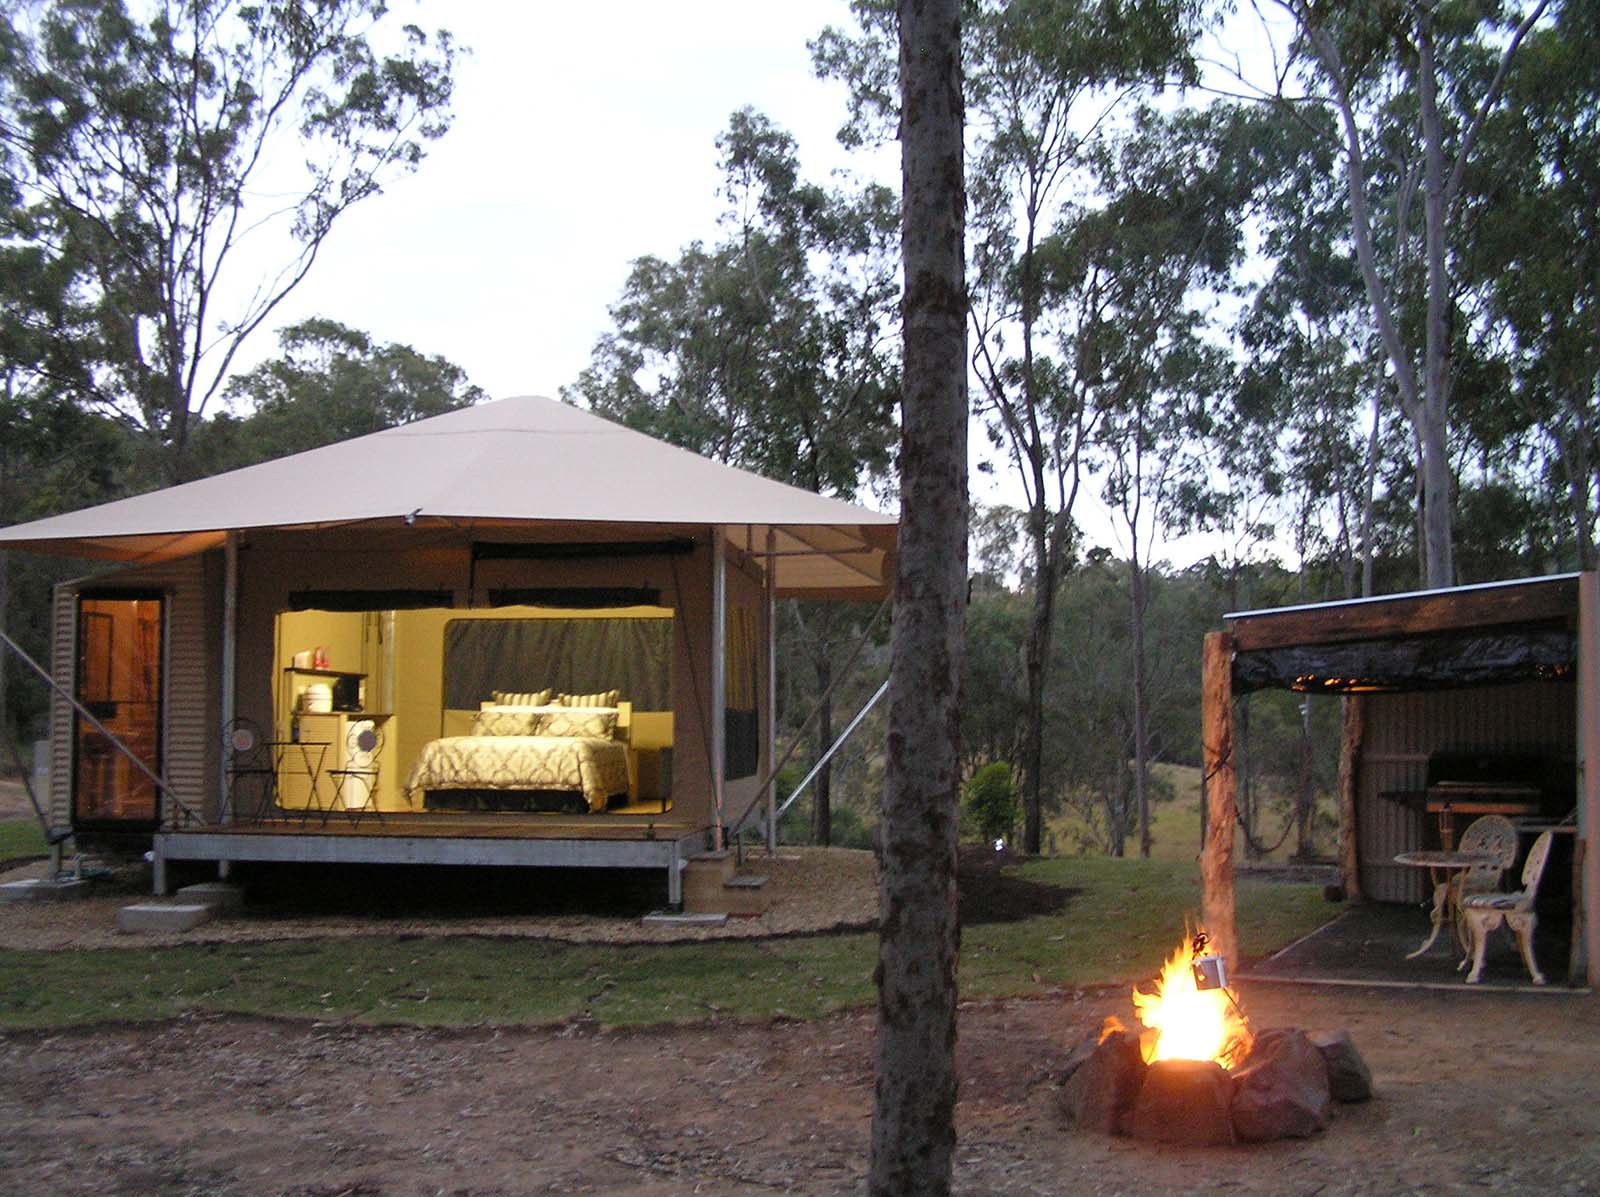 Glamping at Ketchup's Bank, near Boonah | 10 of the best things to do on the Scenic Rim